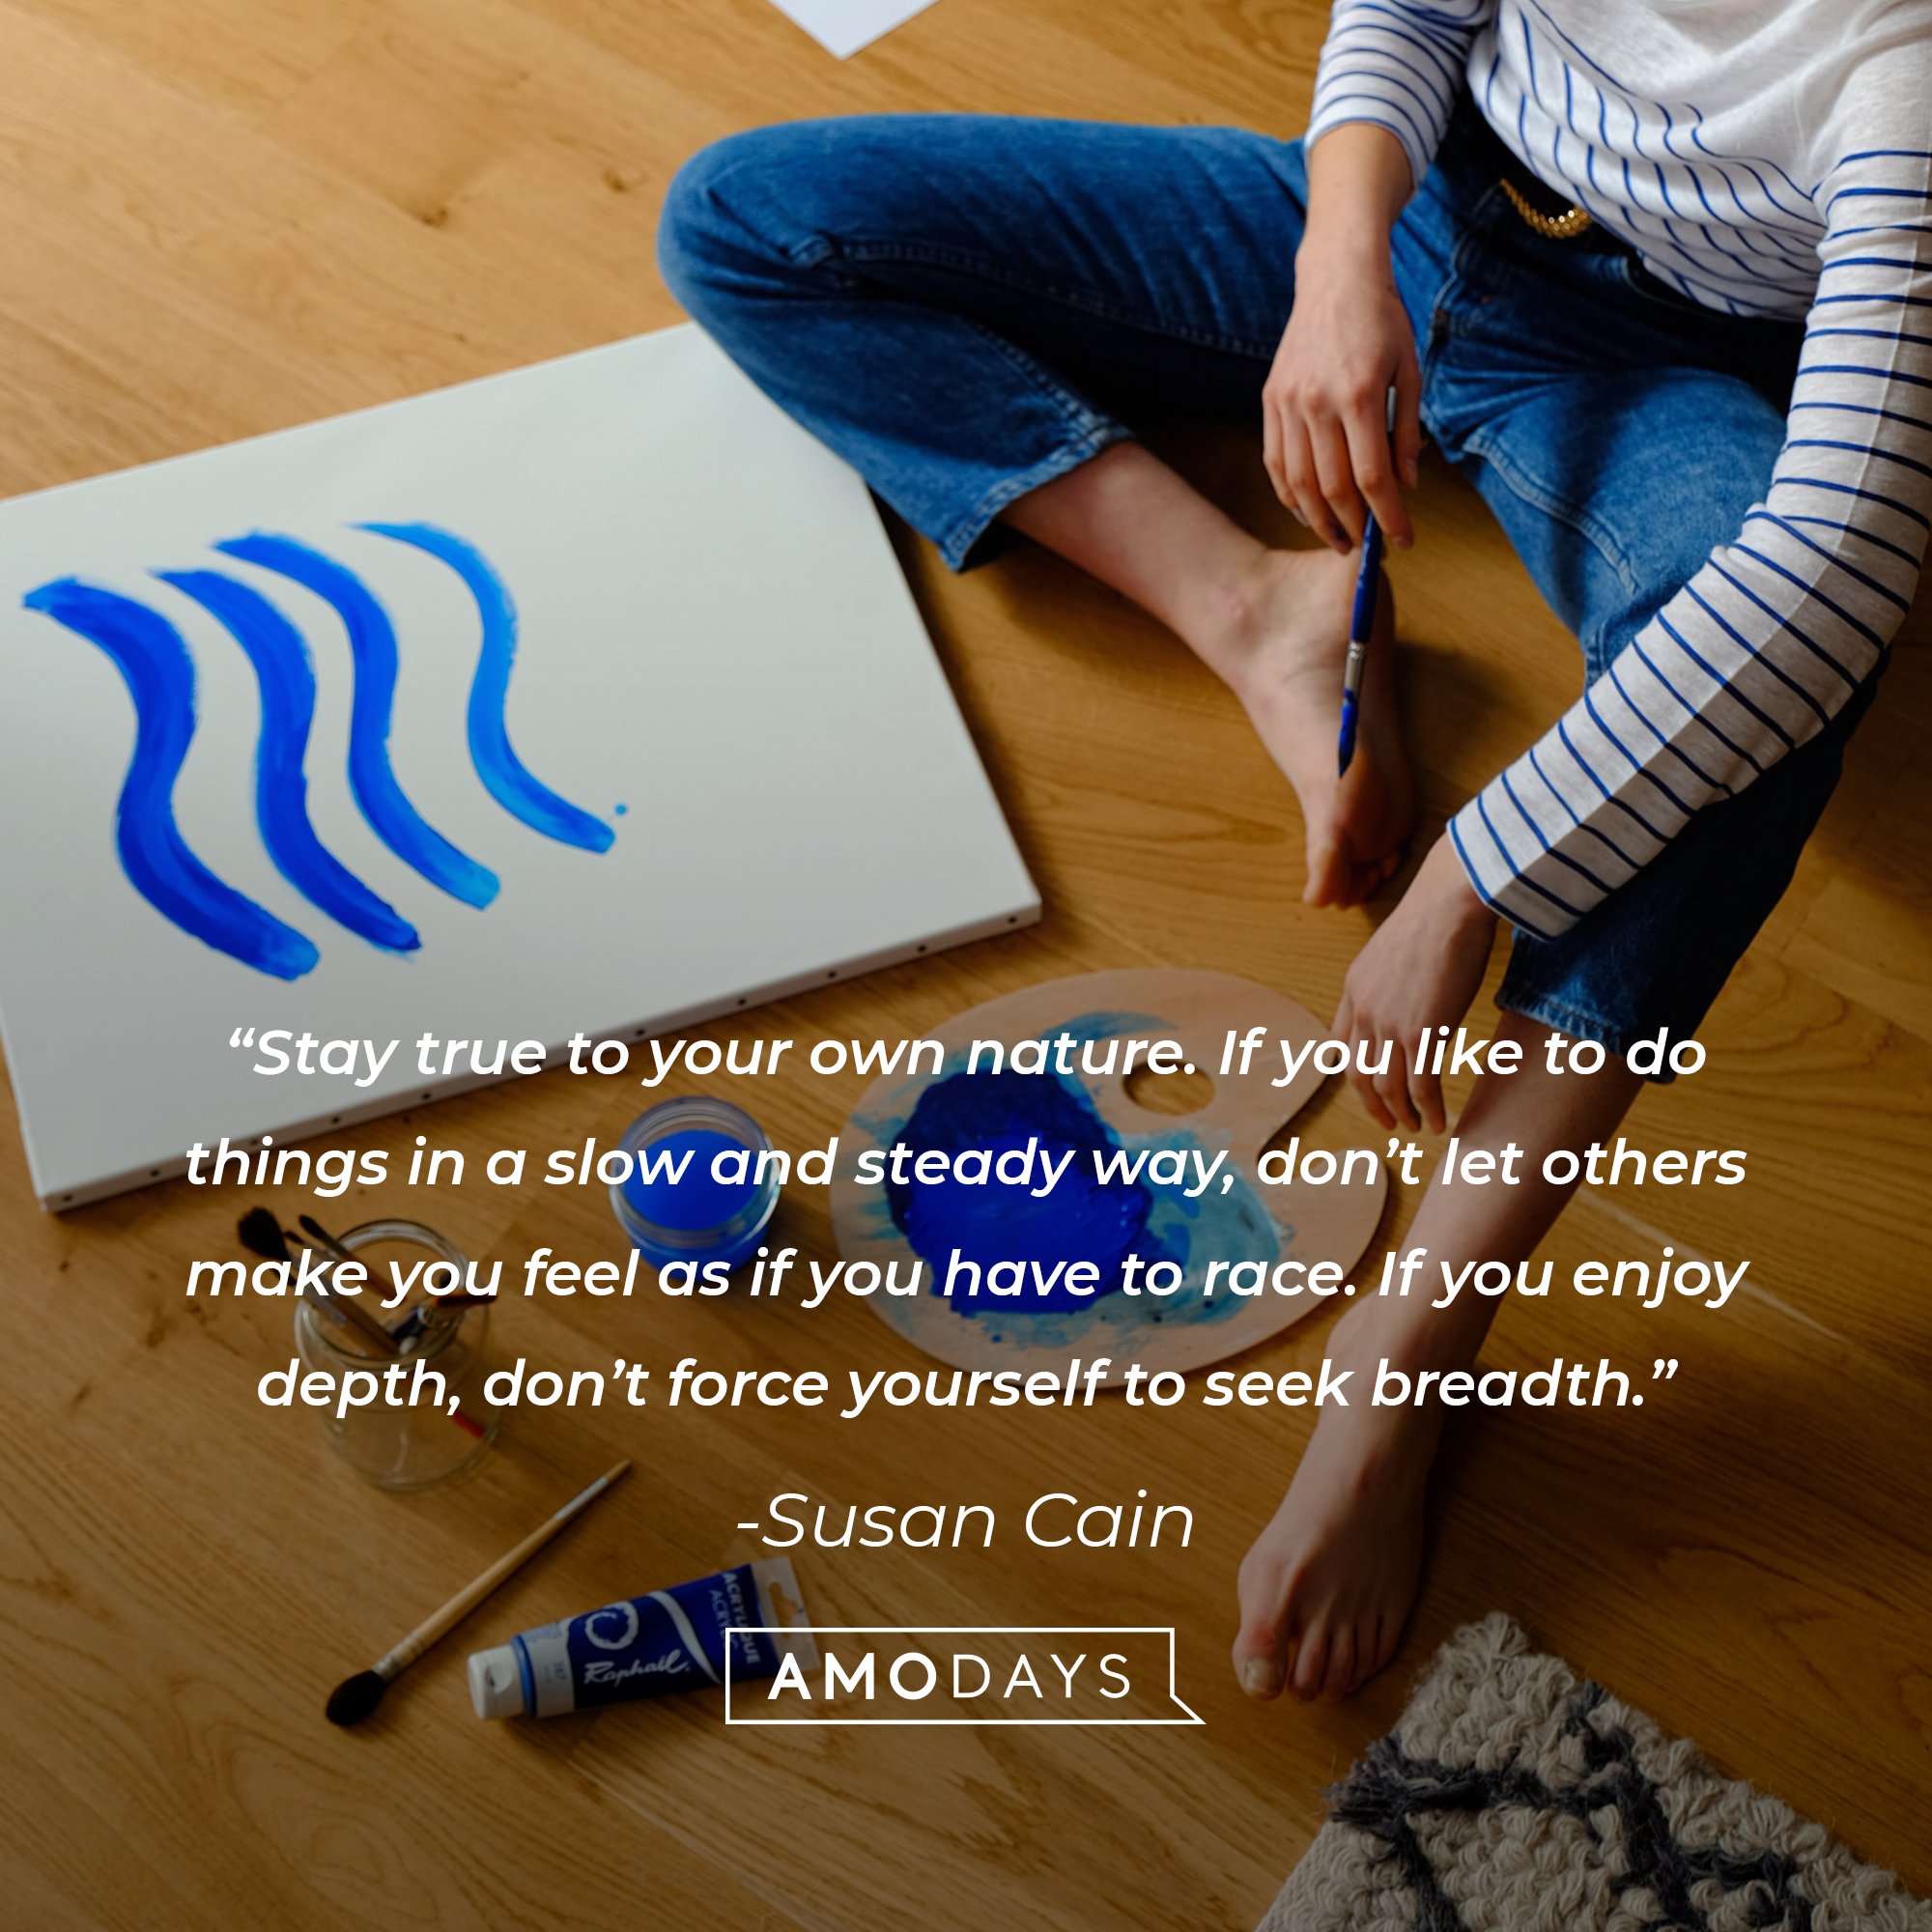  Susan Cain's quote: “Stay true to your own nature. If you like to do things in a slow and steady way, don’t let others make you feel as if you have to race. If you enjoy depth, don’t force yourself to seek breadth.”| Image: AmoDays